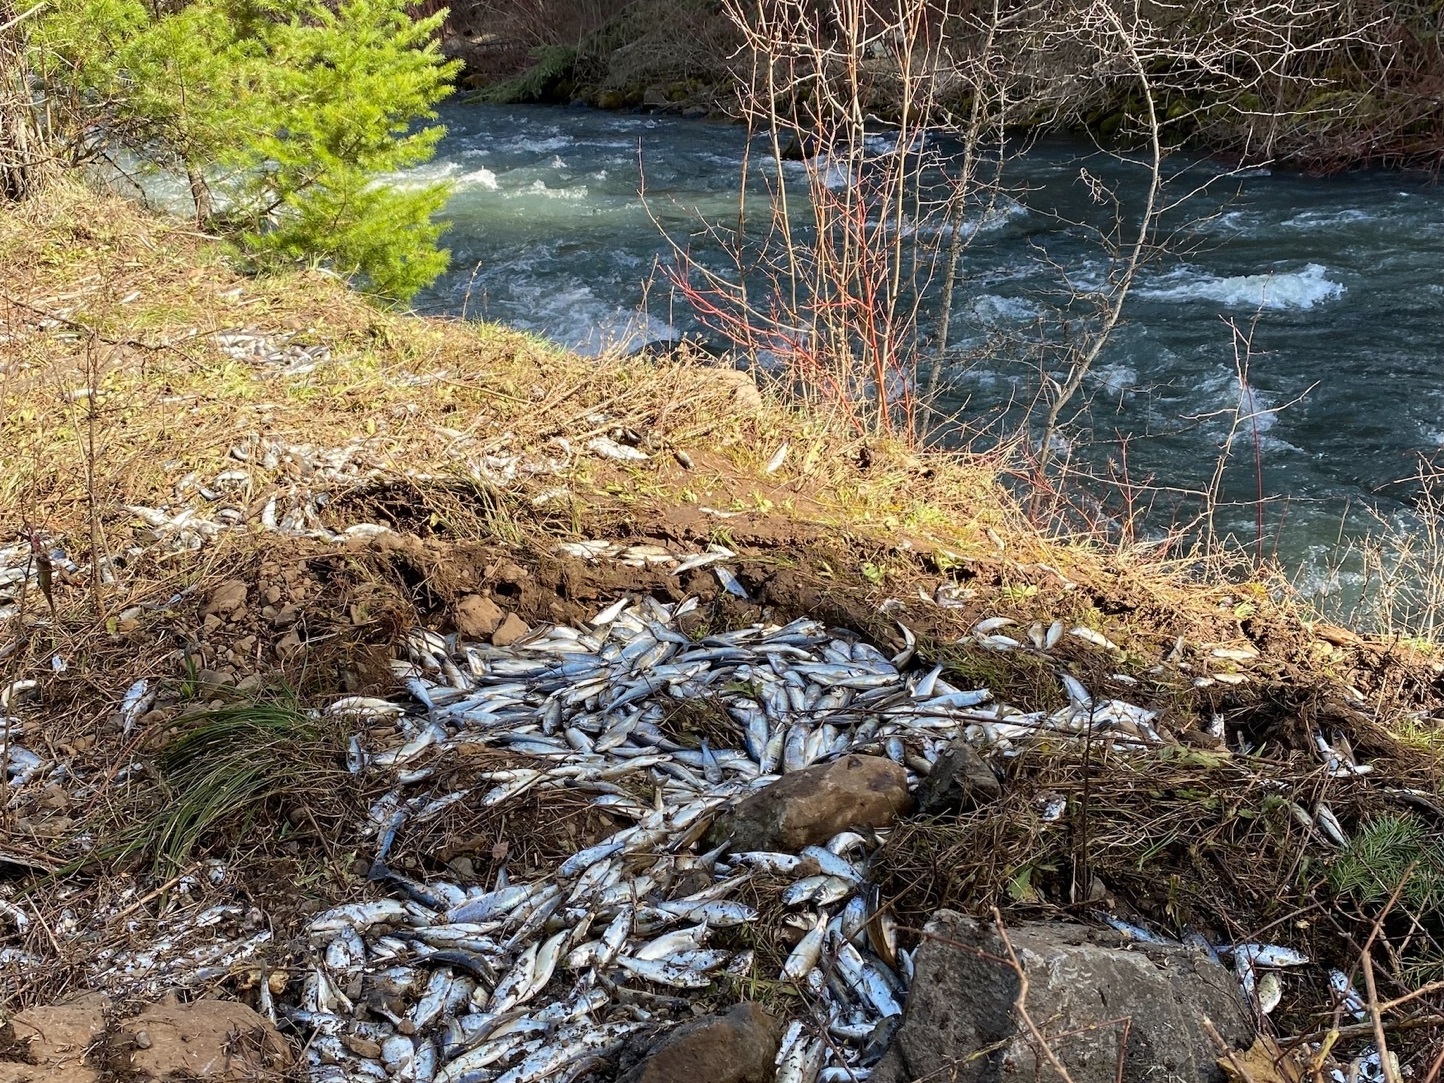 Thousands of young salmon died after the truck crash, unable to reach nearby Lookingglass Creek in northeast Oregon.